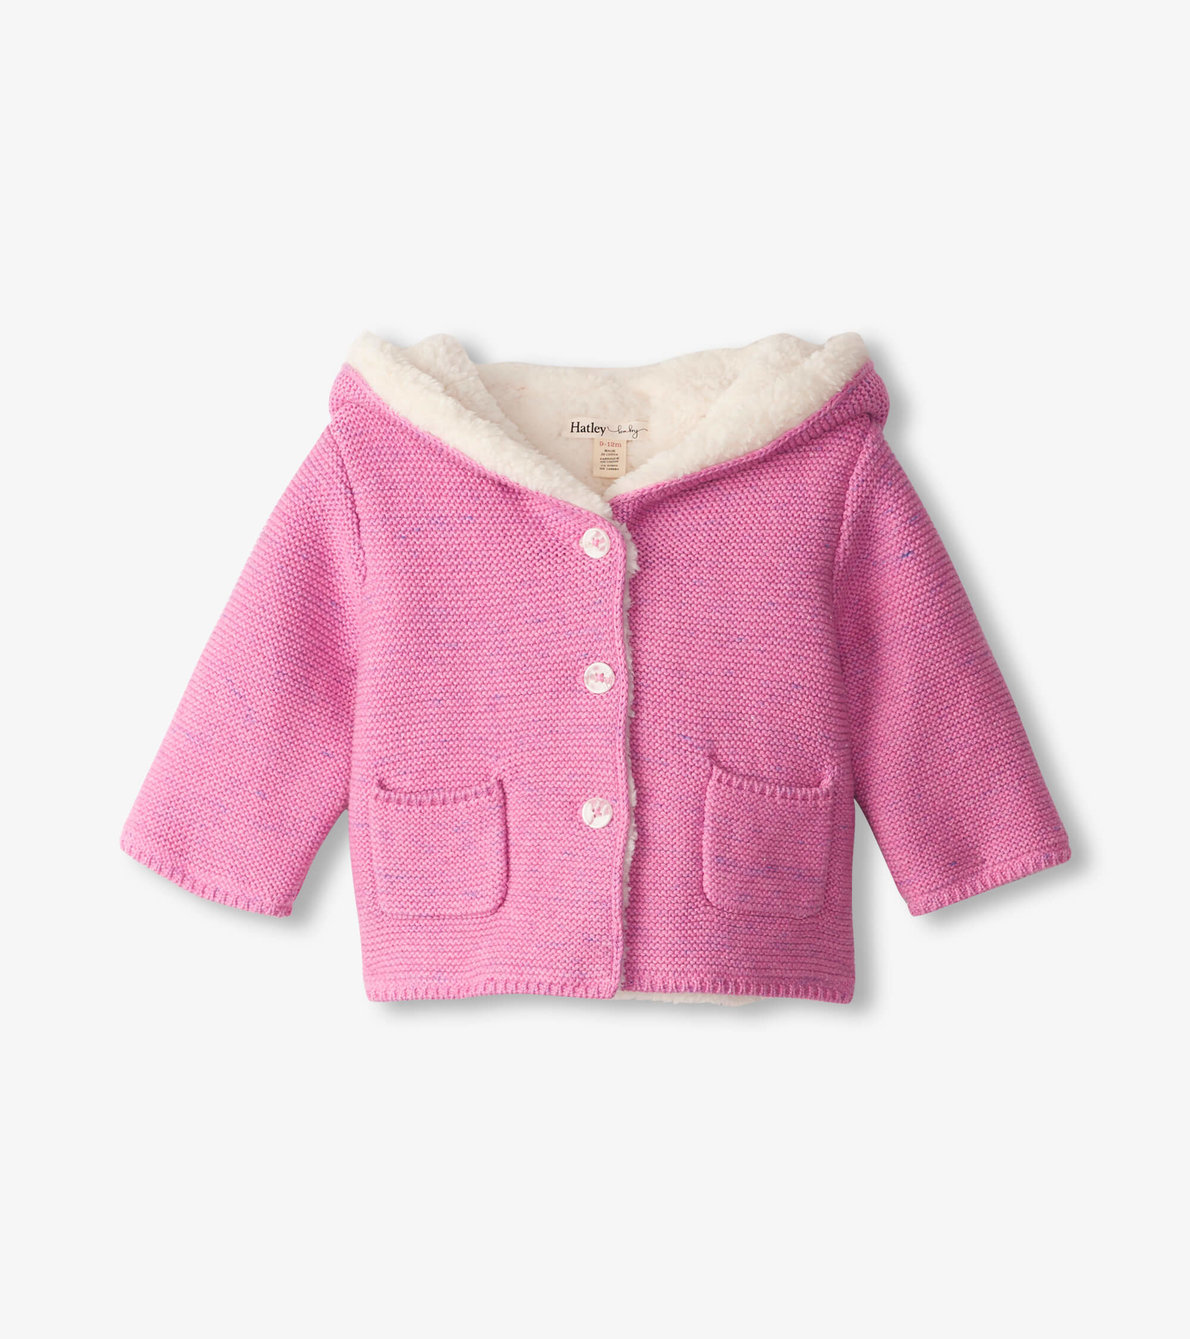 View larger image of Pink Melange Sherpa Lined Baby Sweater